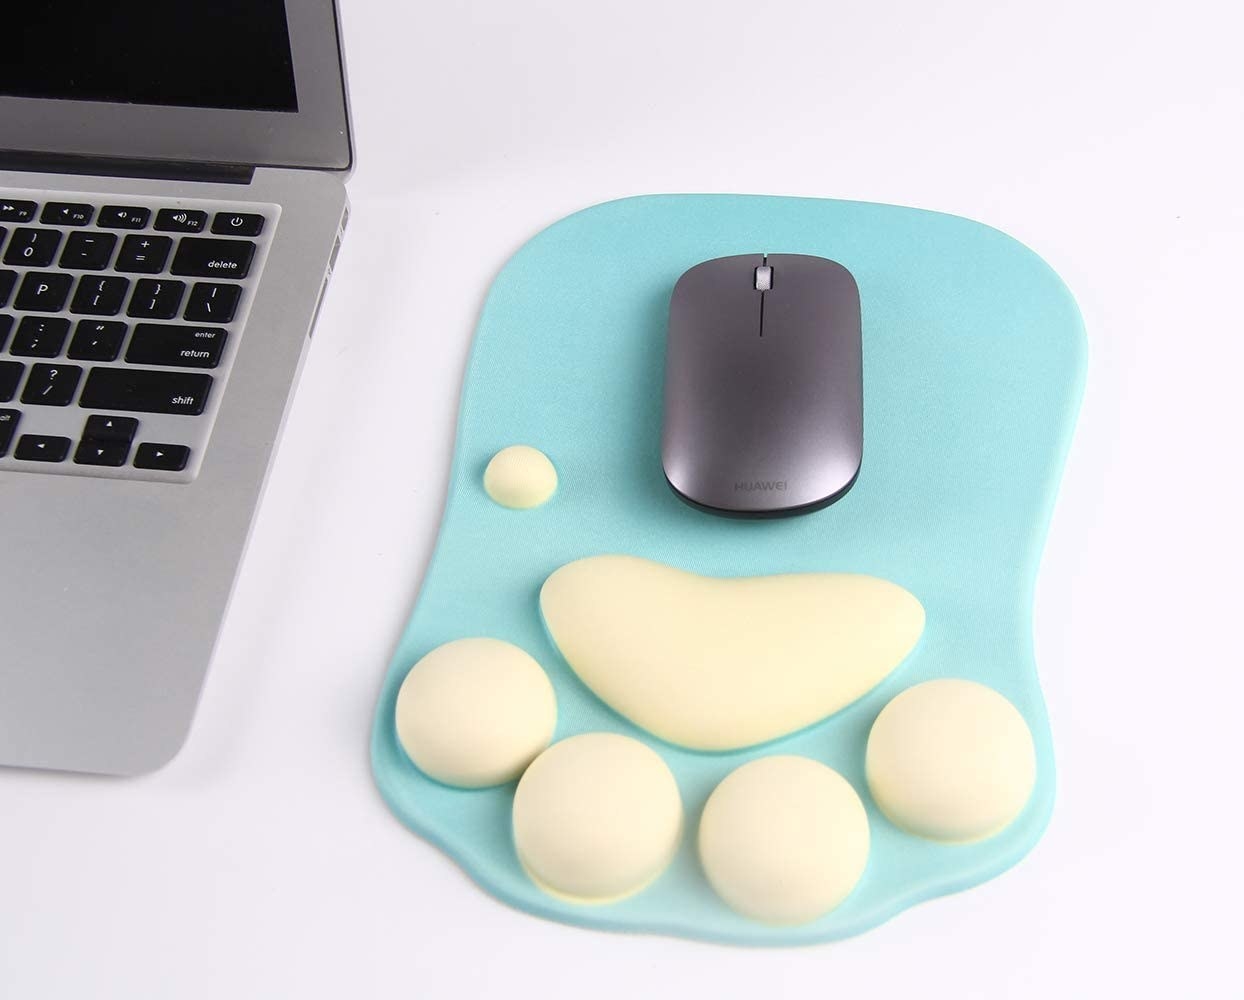 A green mouse pad with light yellow cushions in the shape of a cat paw for wrist support